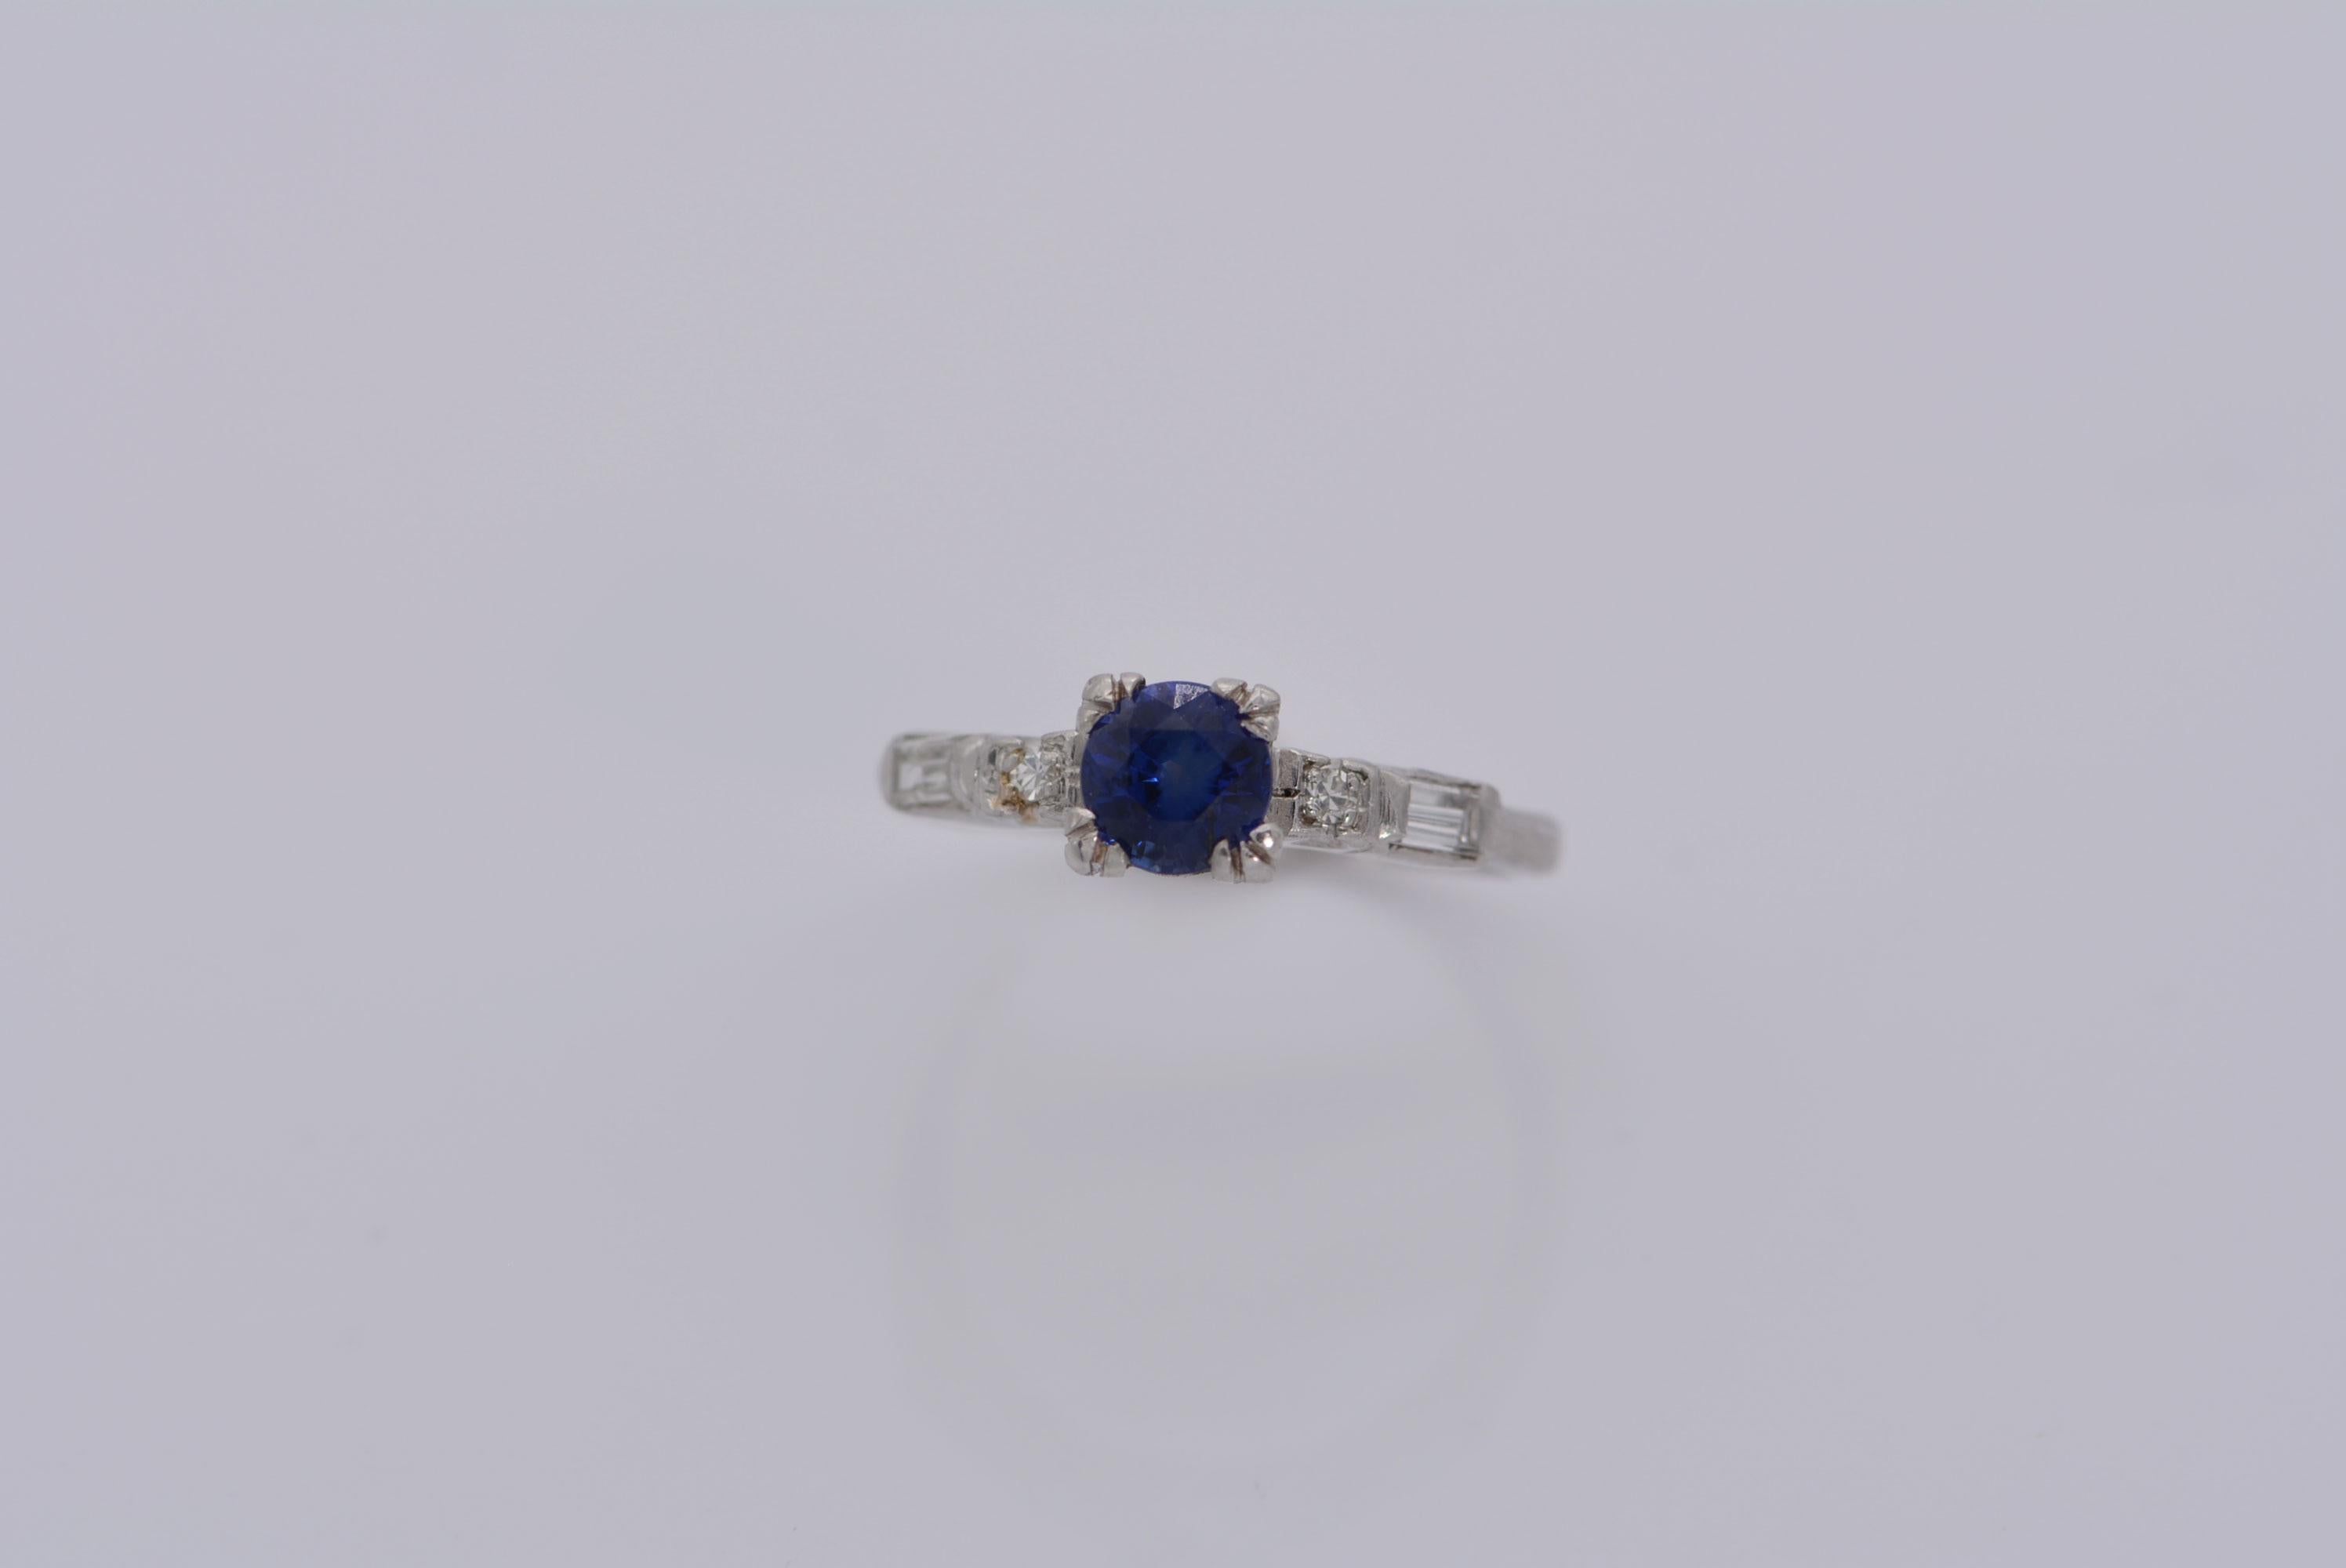 A classic midcentury design in platinum that continues to be produced today!
This ring has a stunning blue sapphire as its main stone, that weighs 0.70ct, which has a GIA origin report stating that it's of Madagascar origin and has had heat